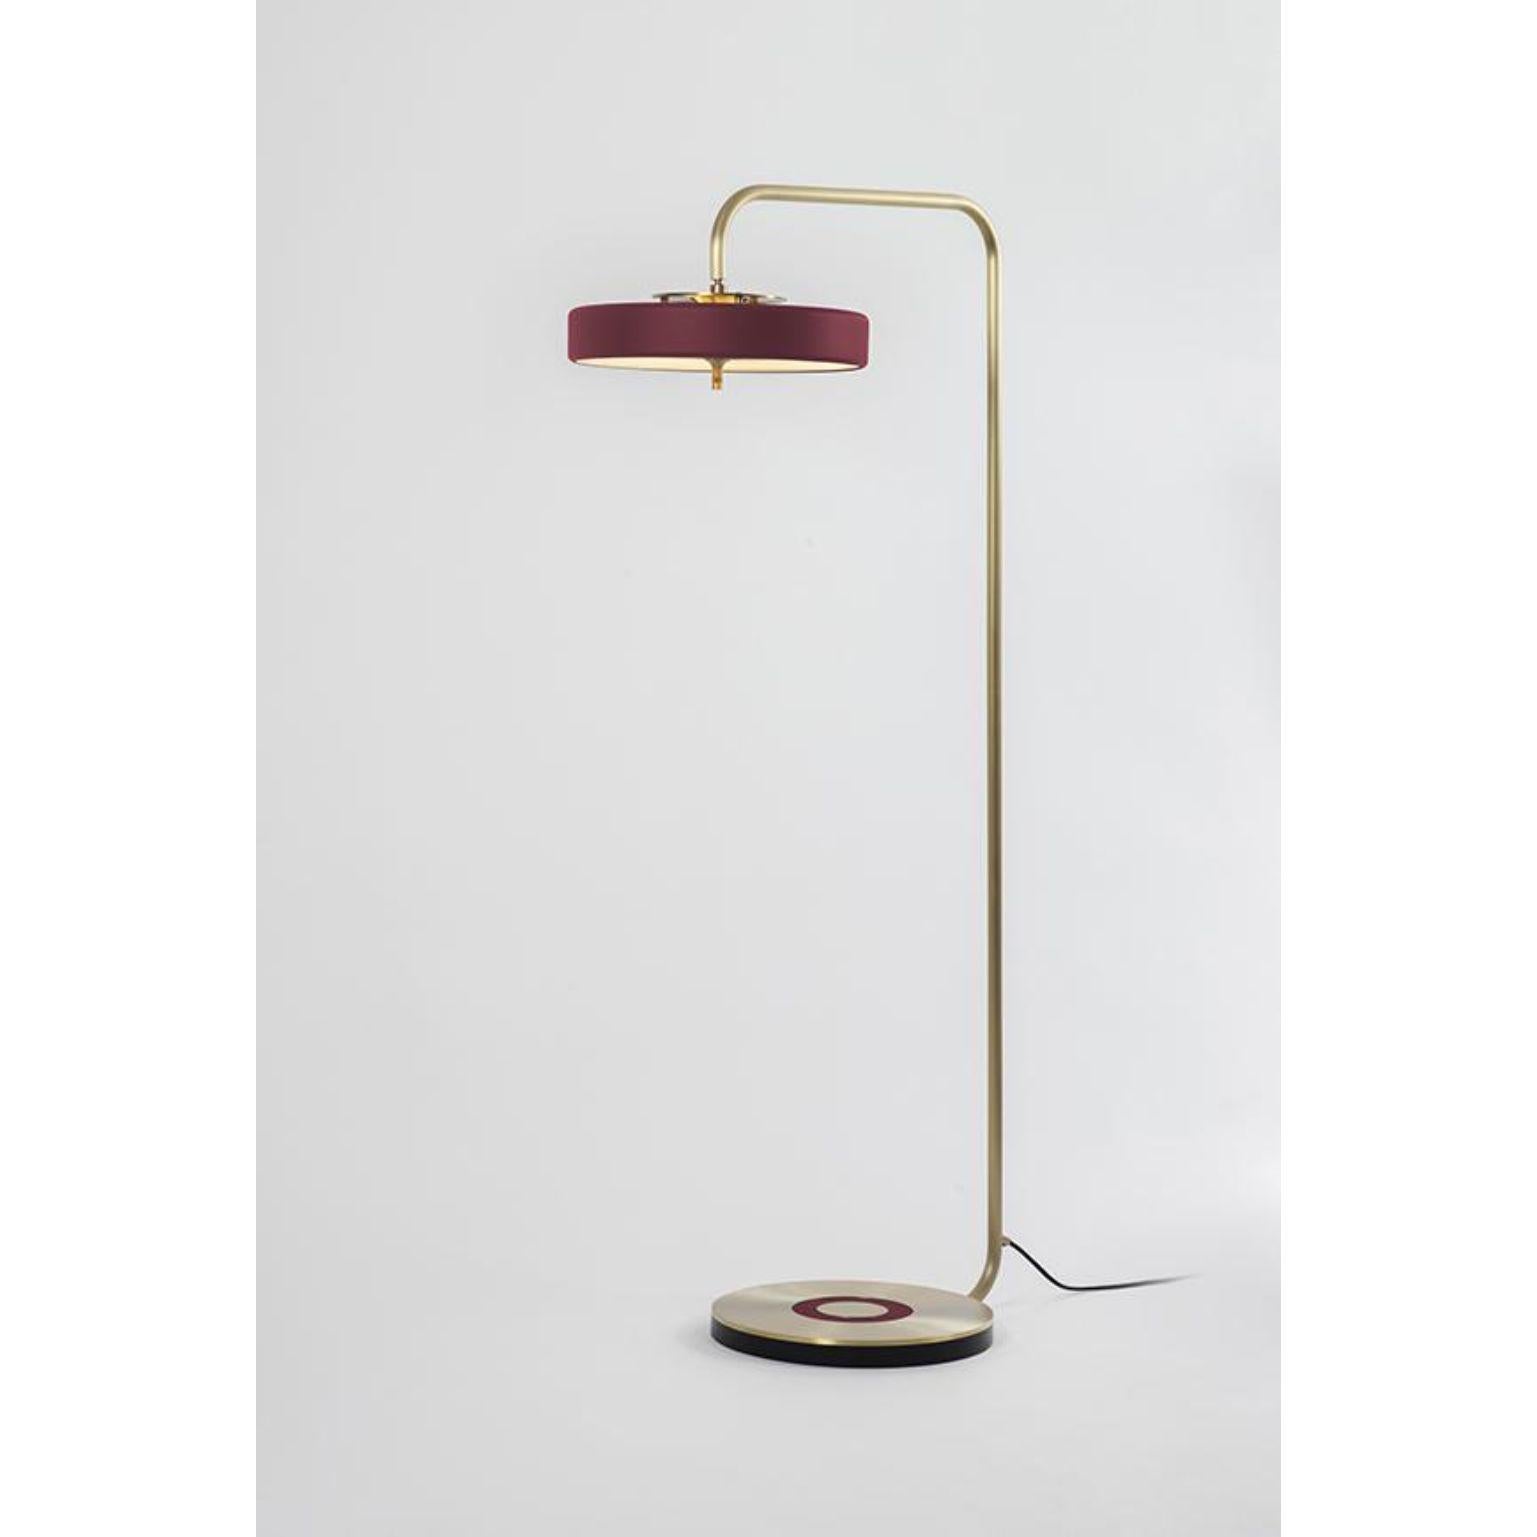 Revolve floor lamp - polished brass - oxblood by Bert Frank
Dimensions: 130 x 35.4 x 9.3 cm
Materials: brass, steel

Also available in brushed brass
When Adam Yeats and Robbie Llewellyn founded Bert Frank in 2013 it was a meeting of minds and